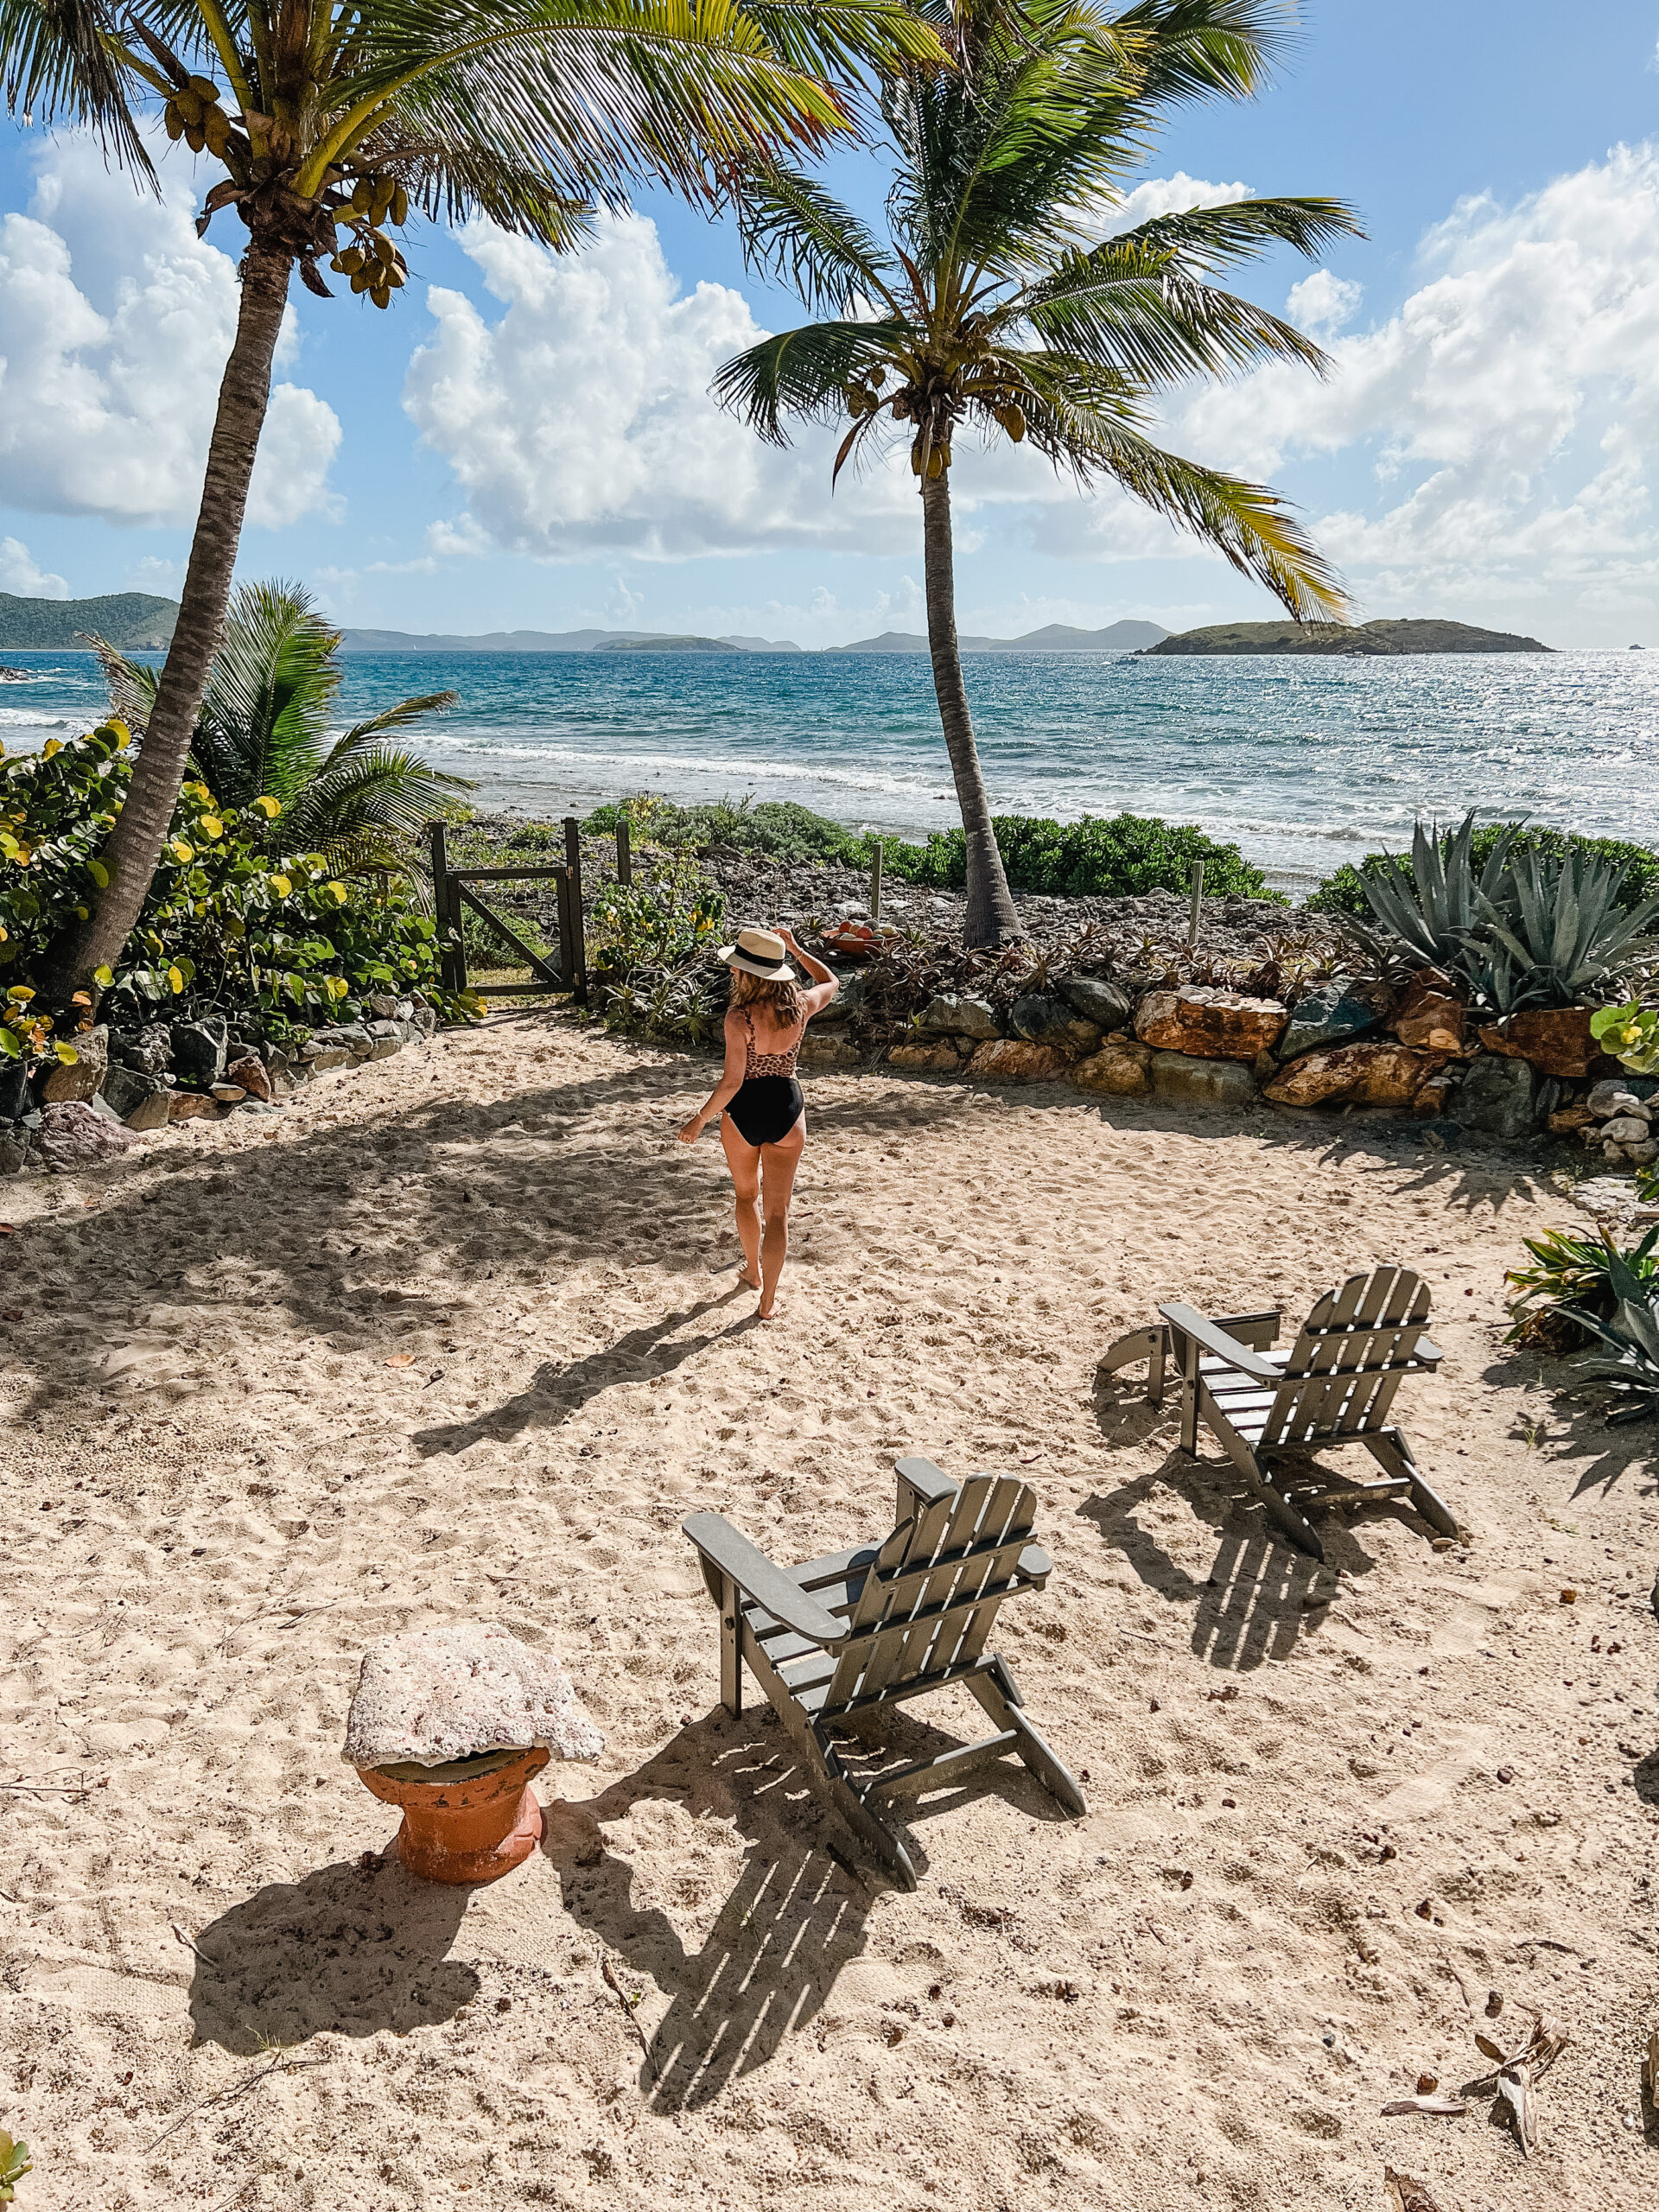 Connecticut life and style blogger Lauren McBride shares her experience in Coral Bay, St. John USVI including beaches and restaurants.